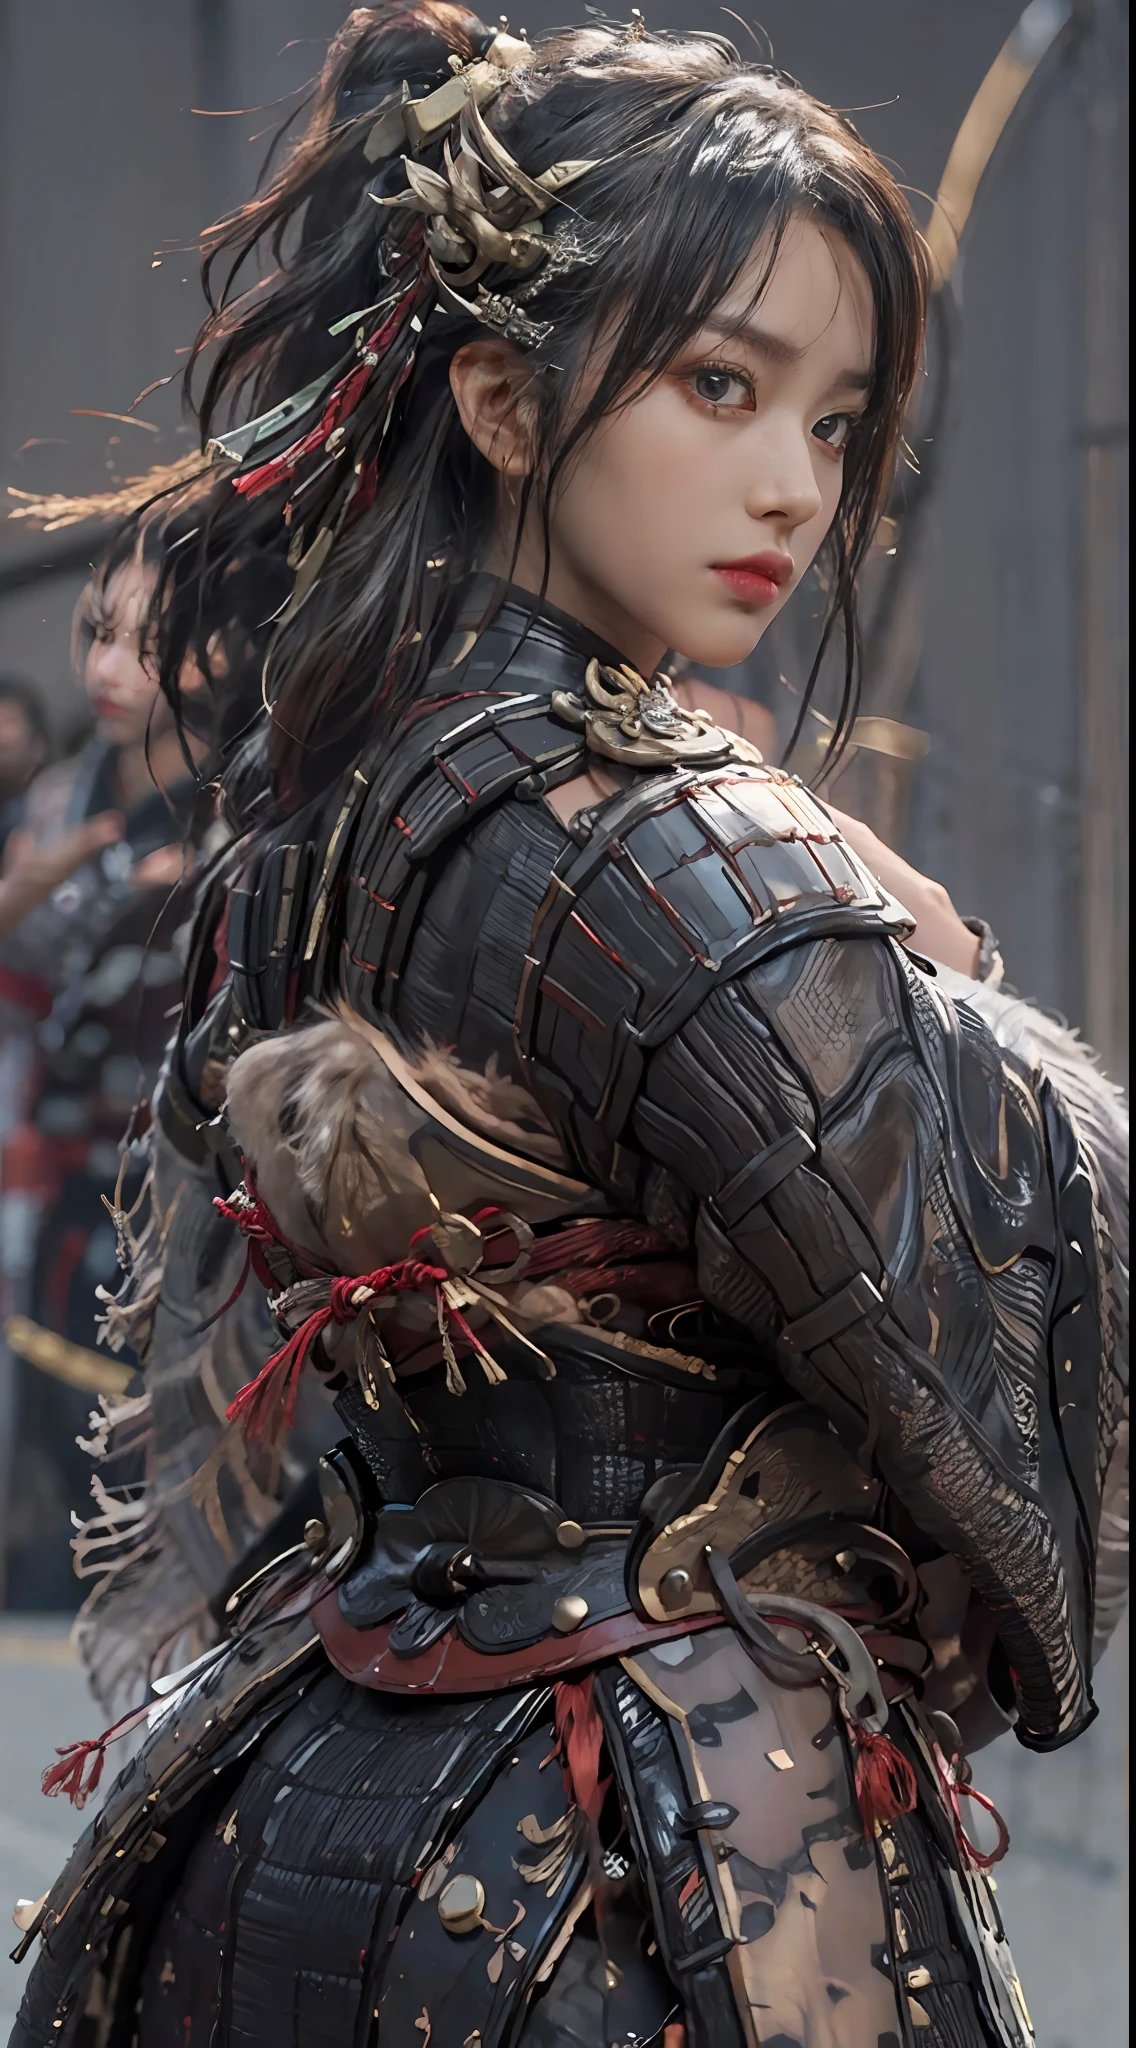 ((Unreal Engine 5)), Realistic rendering, Excellent, (Full set of samurai armor), (Cuirassiers), (Cloak), (The samurai were at the helm), looking on camera, Stand in the studio, Beautiful face, Makeup, CGImix, (Photorealism:1.2), ultrarealistic uhd face,, Slim waist, Hourglass figure, Half body, ((Glowing skin)), ((Shiny skin)), Realistic body, ((She has sexy bodies)), ((Clean skin)), Photorealistic, Bokeh, Motion blur, Masterpiece, A high resolution, 1080p, Super detail, Textured skin.